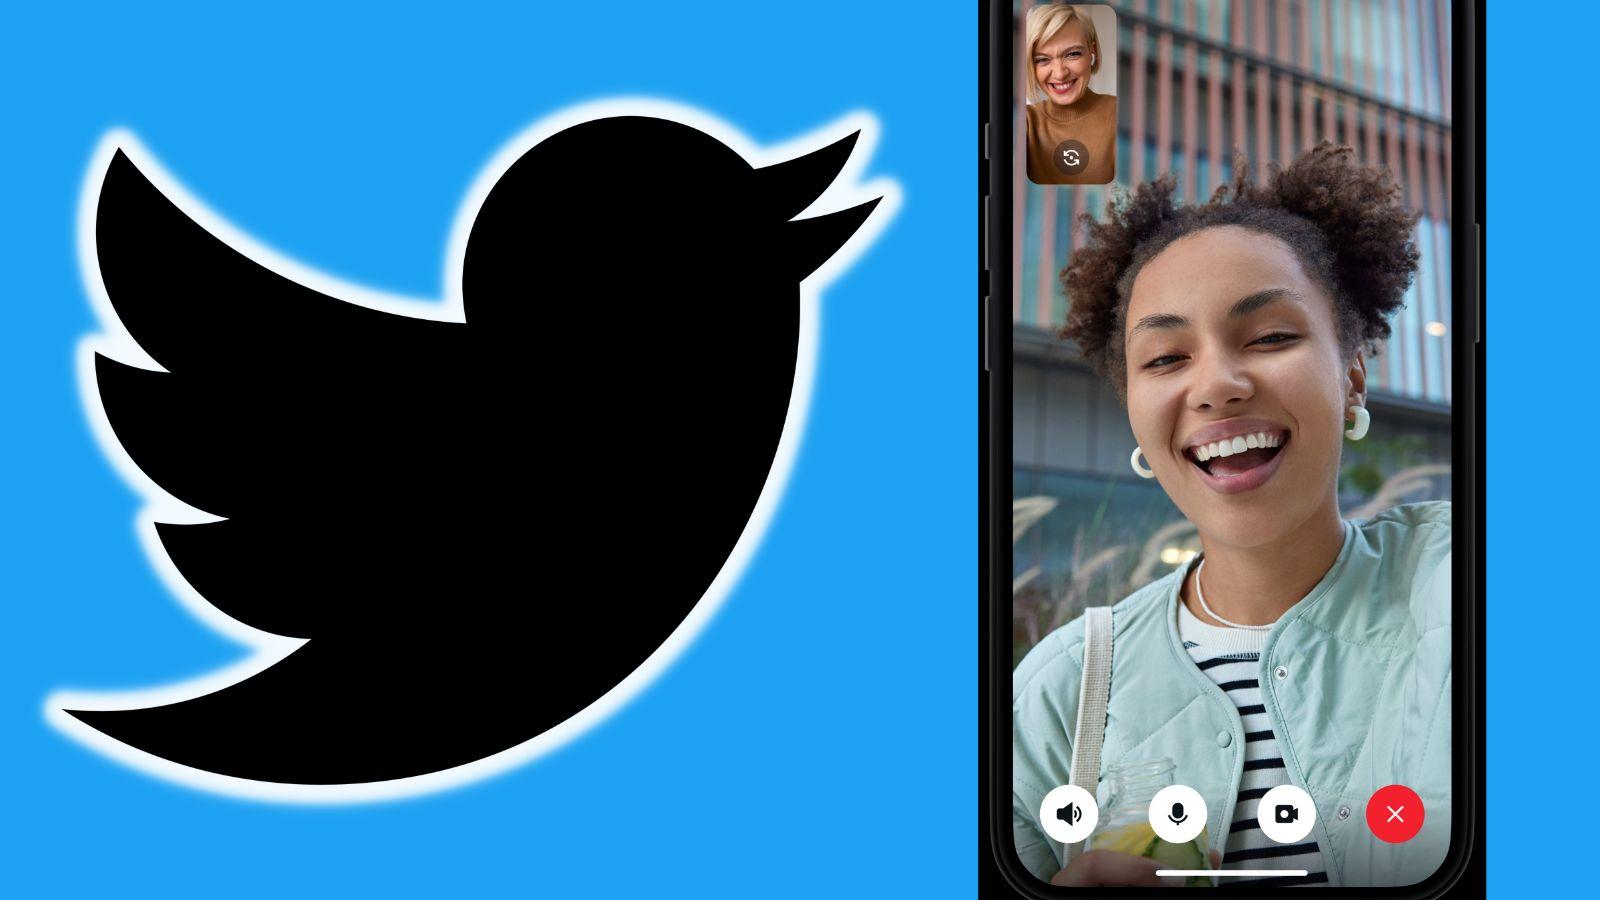 twitter video call feature with logo header